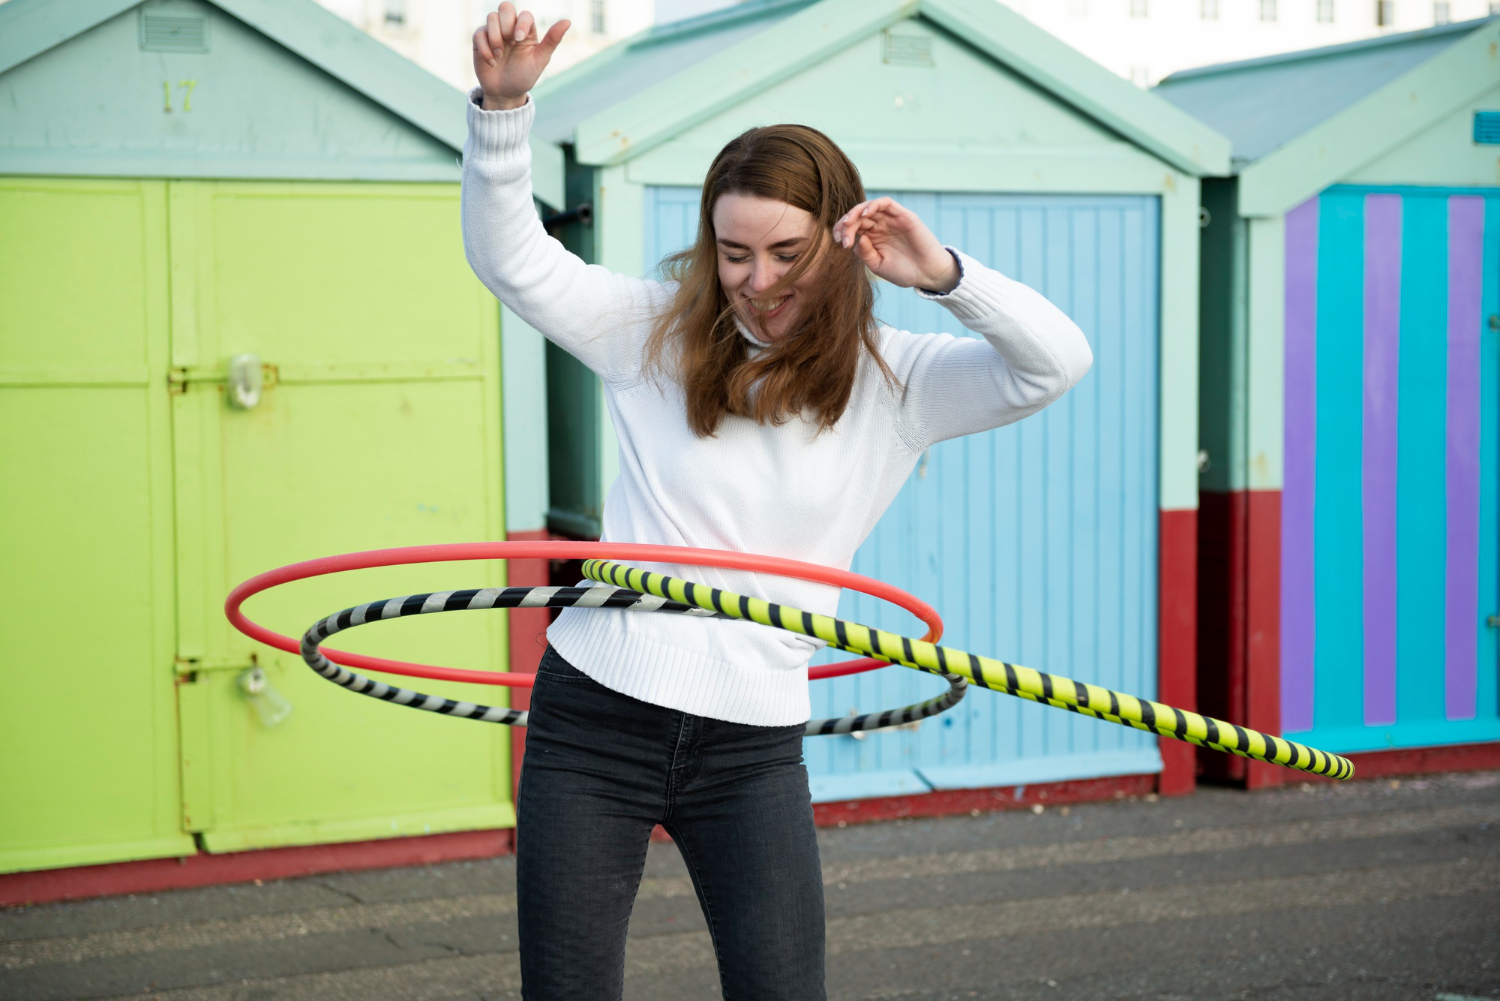 female college student playing with hula hoops outdoors